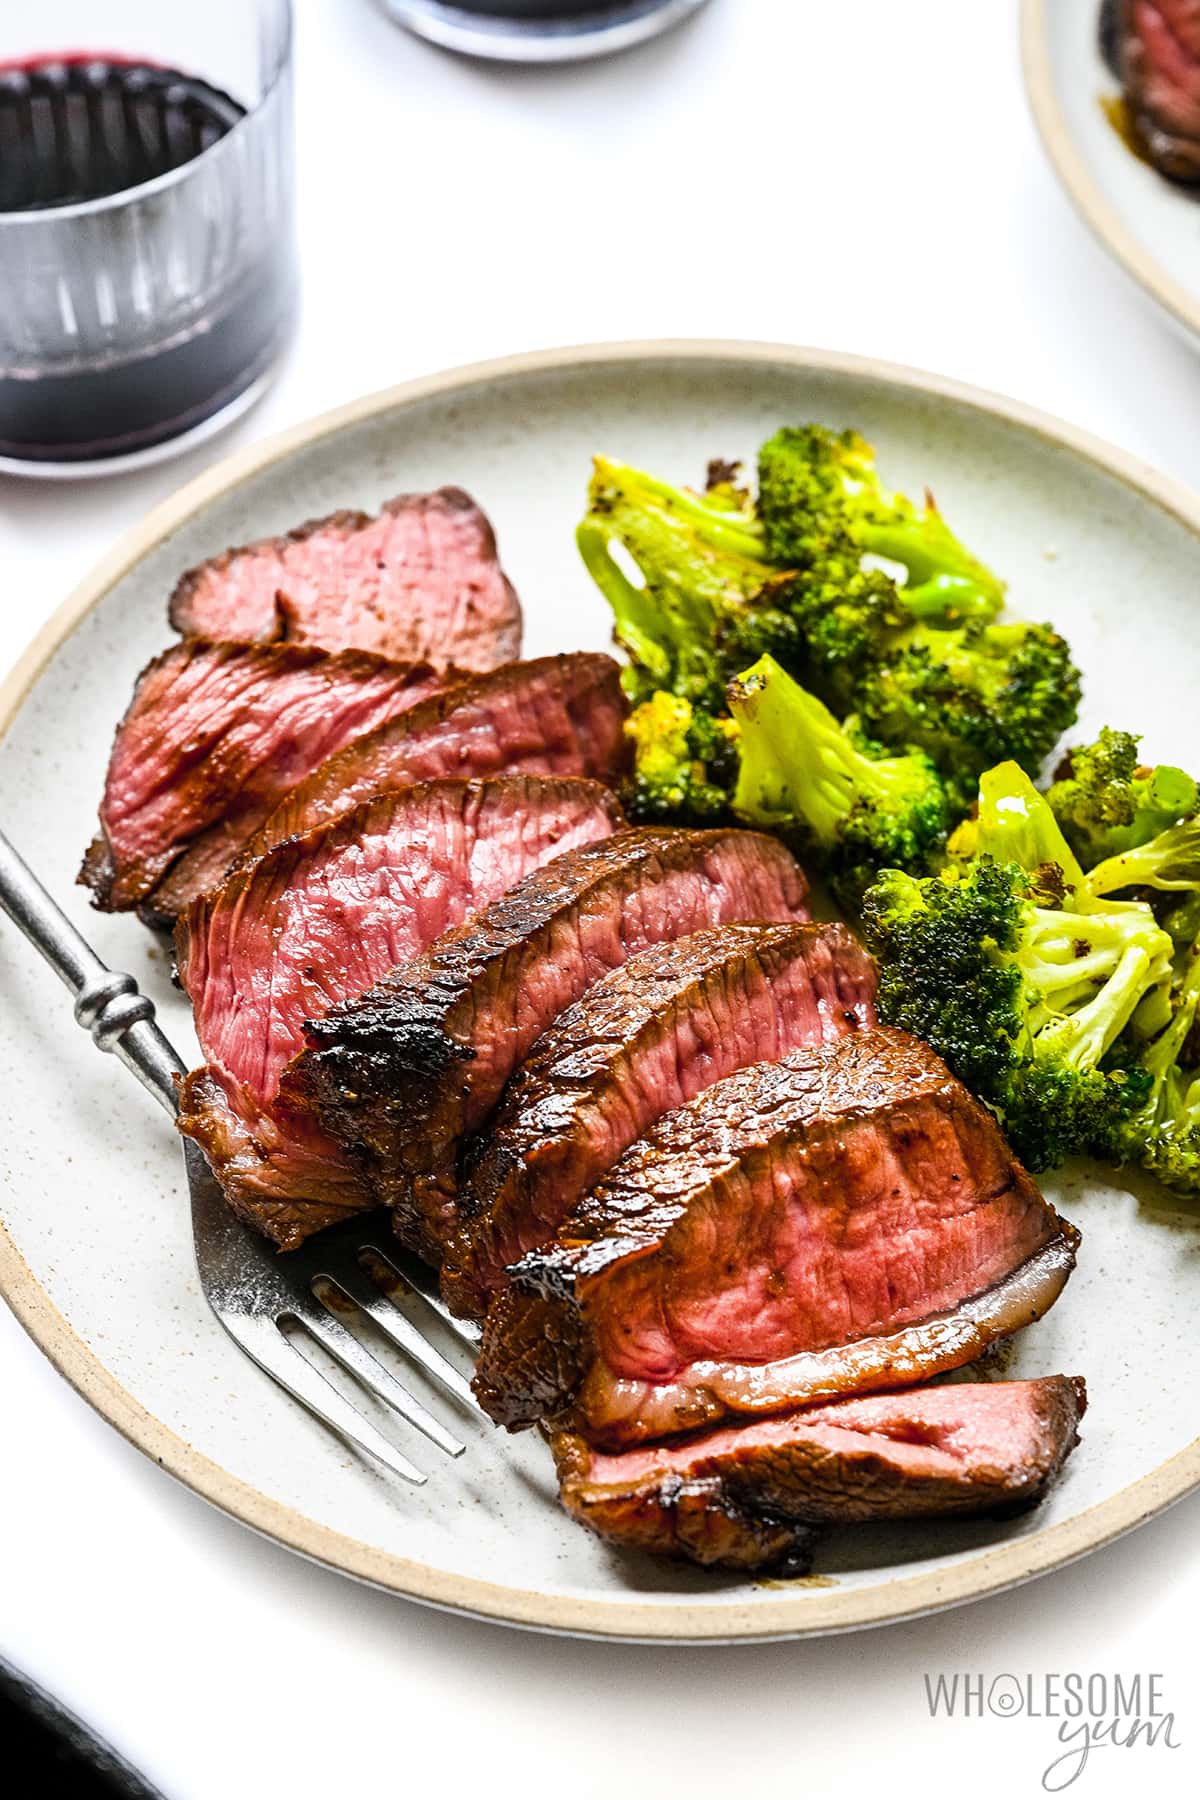 Sliced steak cooked in marinade on a plate with broccoli and a fork.